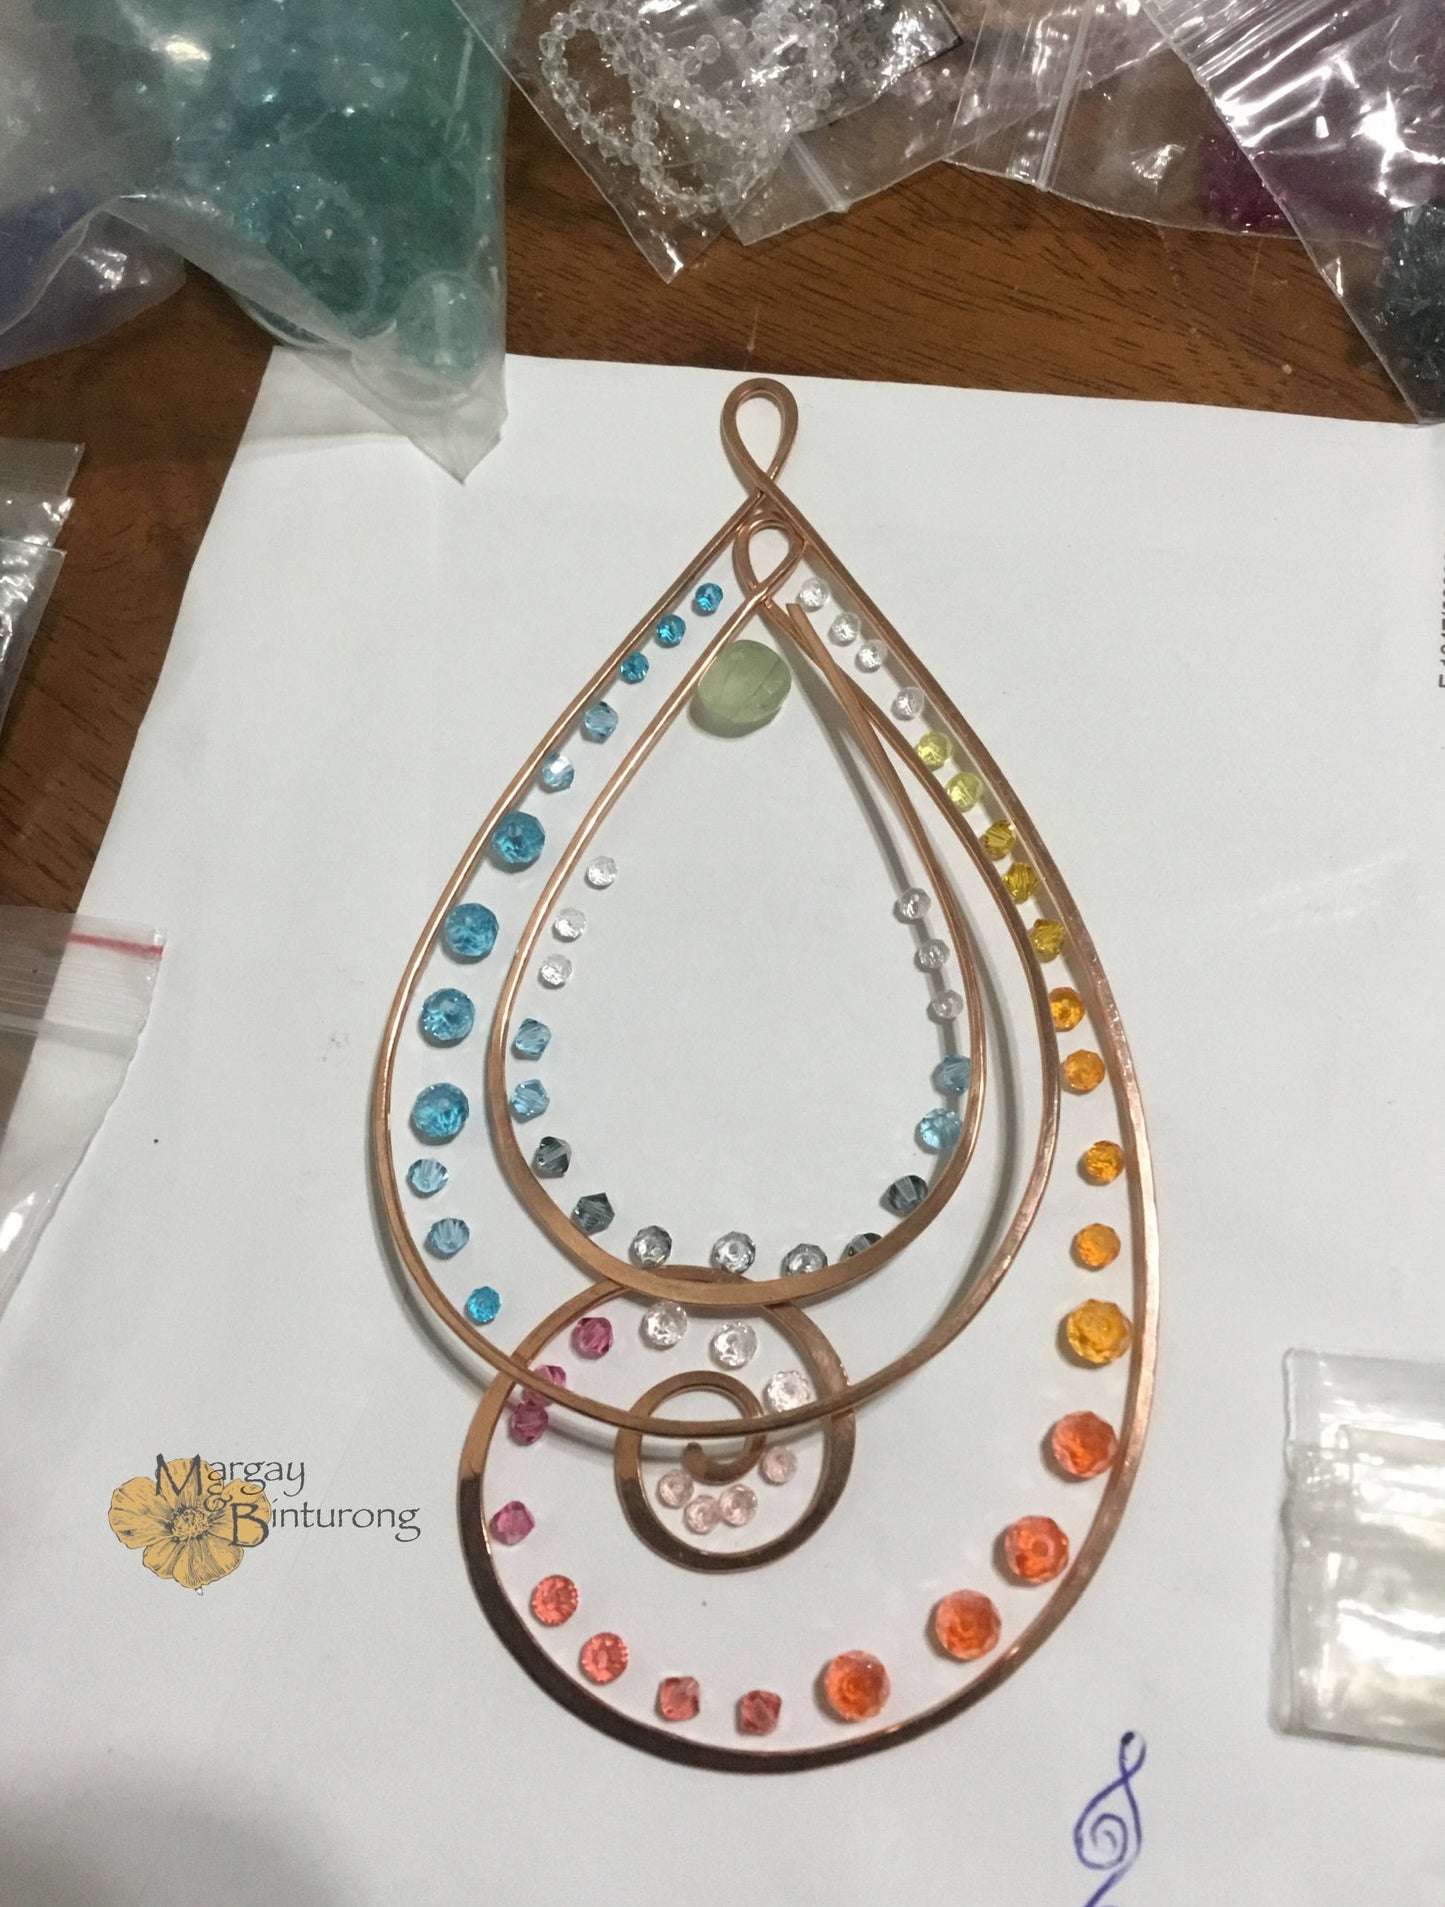 Paisley-esque Suncatcher made with Crystal prisms is wire art waiting to be hung in your home